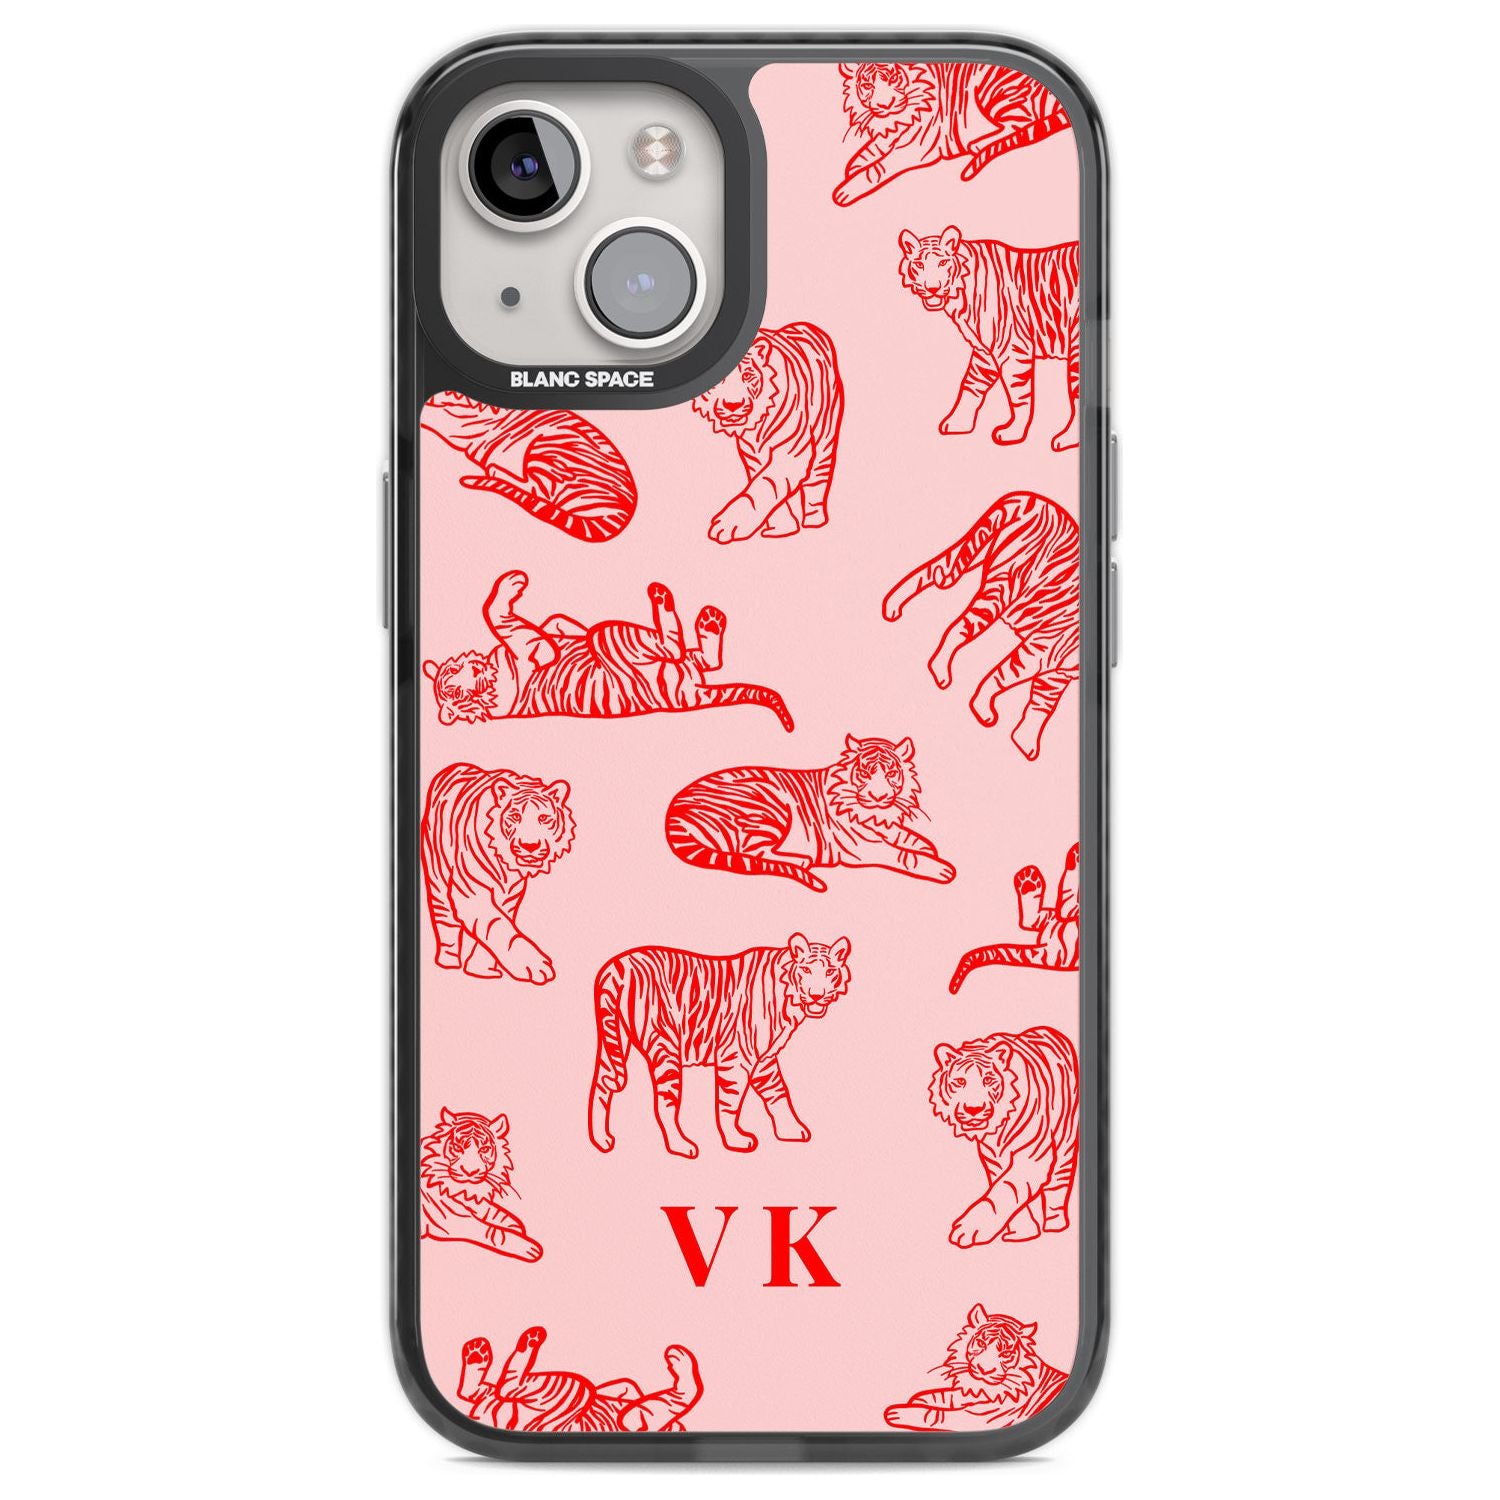 Personalised Red Tiger Outlines on Pink Custom Phone Case iPhone 12 / Black Impact Case,iPhone 13 / Black Impact Case,iPhone 12 Pro / Black Impact Case,iPhone 14 / Black Impact Case,iPhone 15 Plus / Black Impact Case,iPhone 15 / Black Impact Case Blanc Space